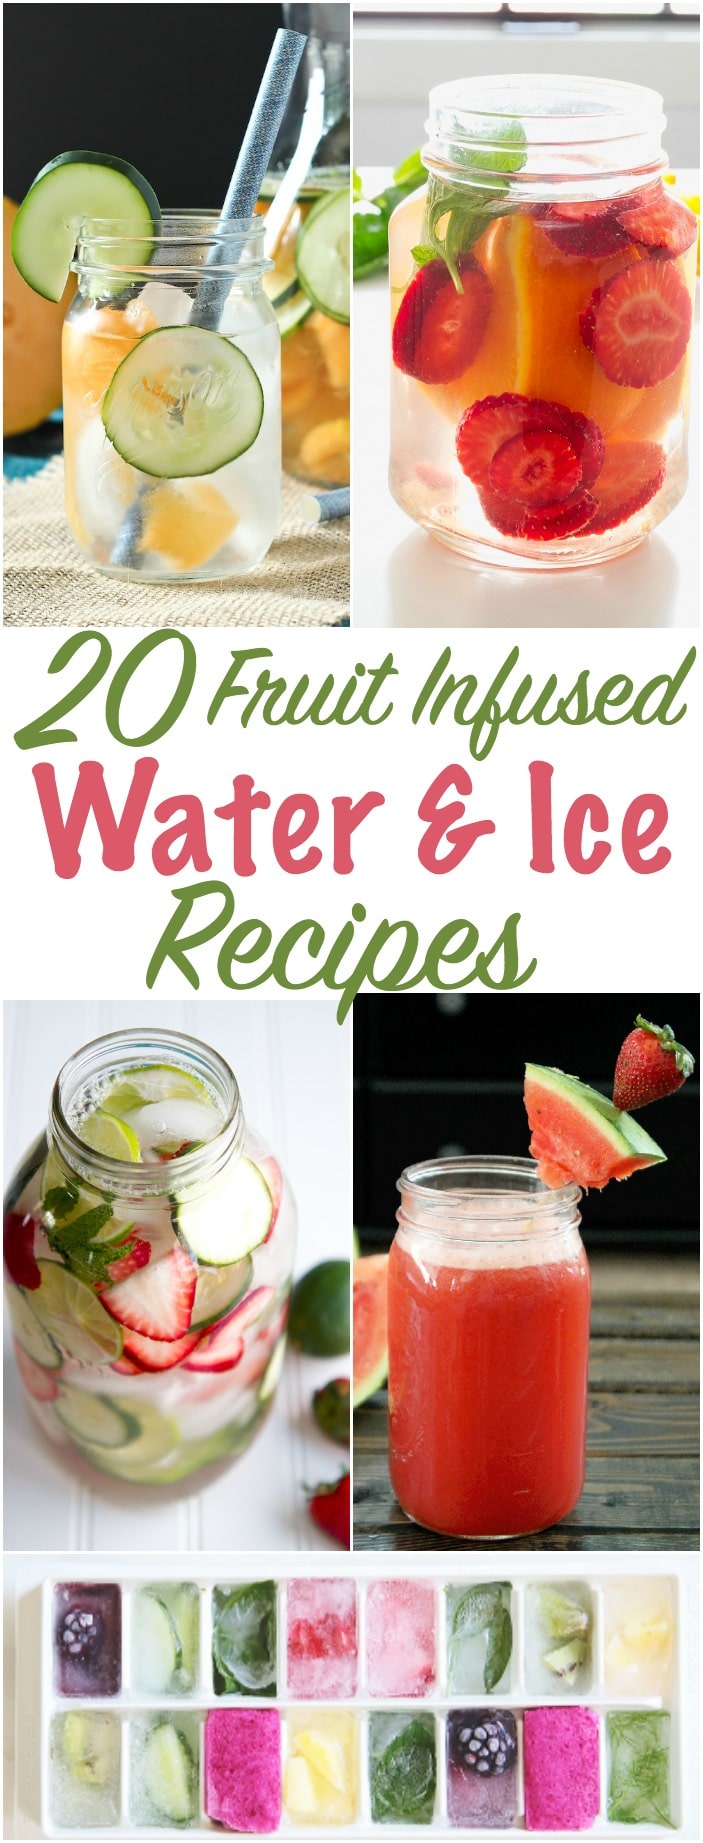 fruit infused water and ice recipes